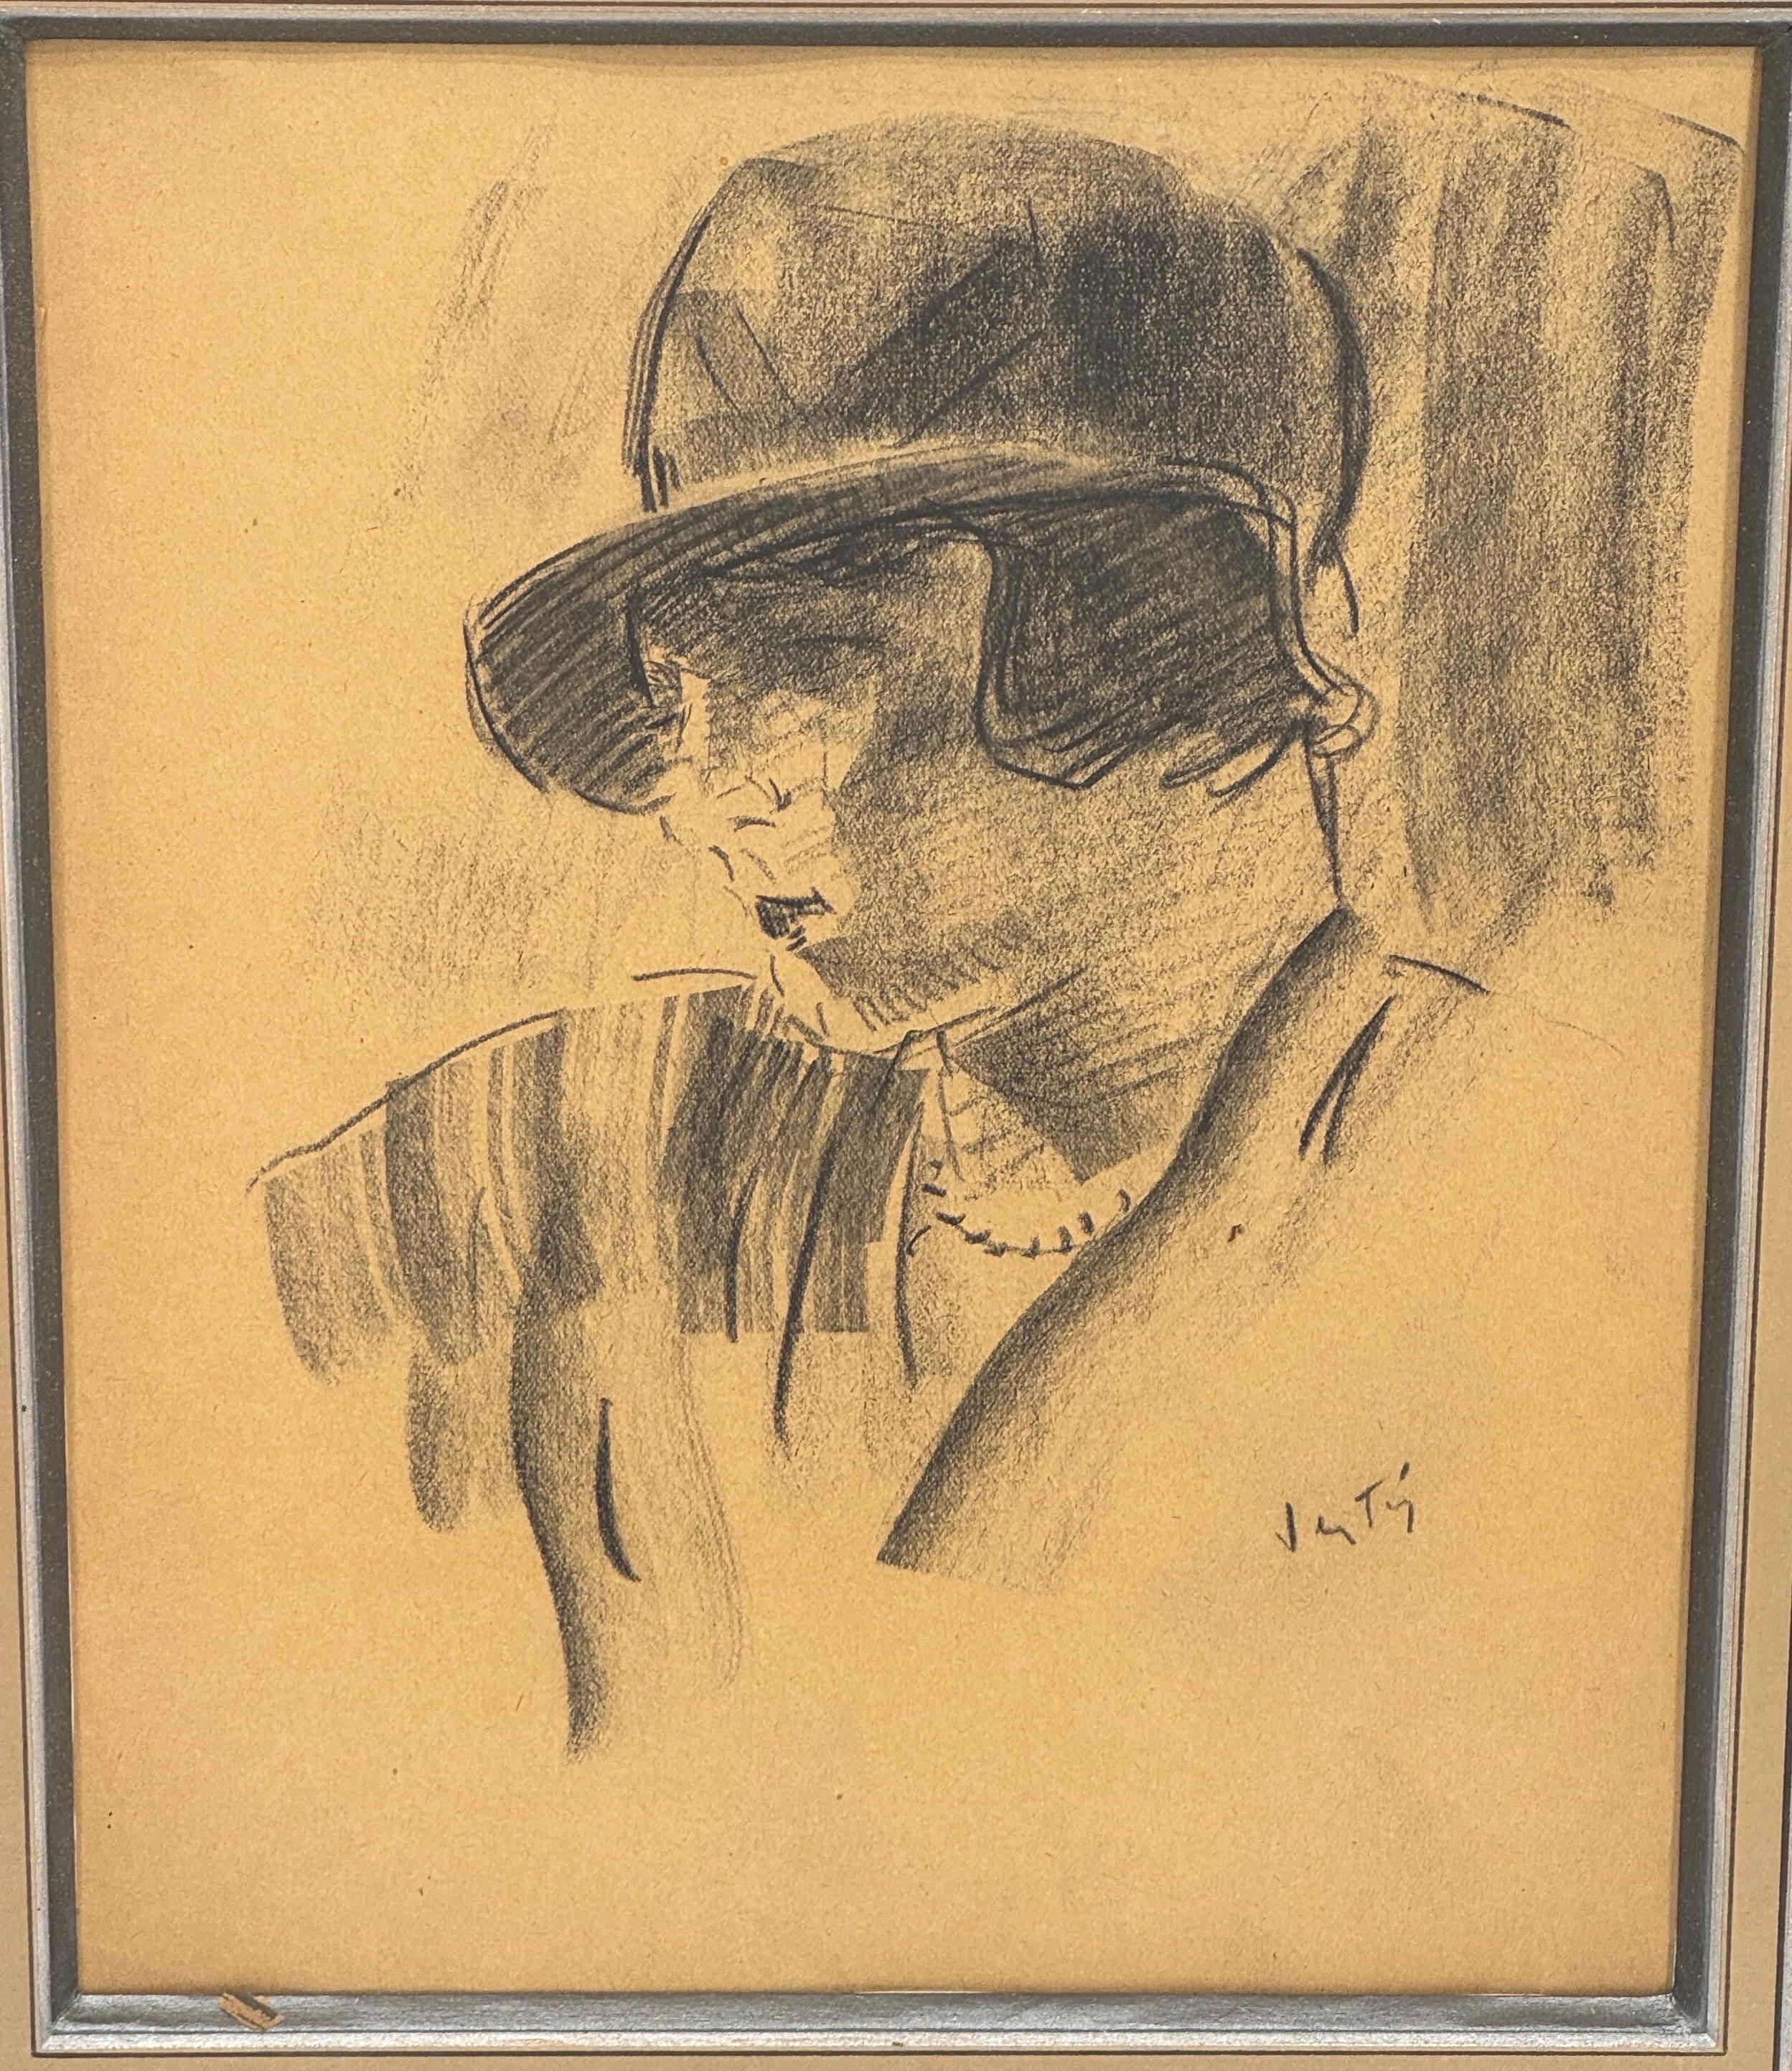 Marcel Vertes Original Charcoal Drawing of French American Woman

A classic piece of artwork by well know artist Marcel Vertes. This art has been drawn in charcoal portraying a French American woman in a hat posing. Has been signed on the right by